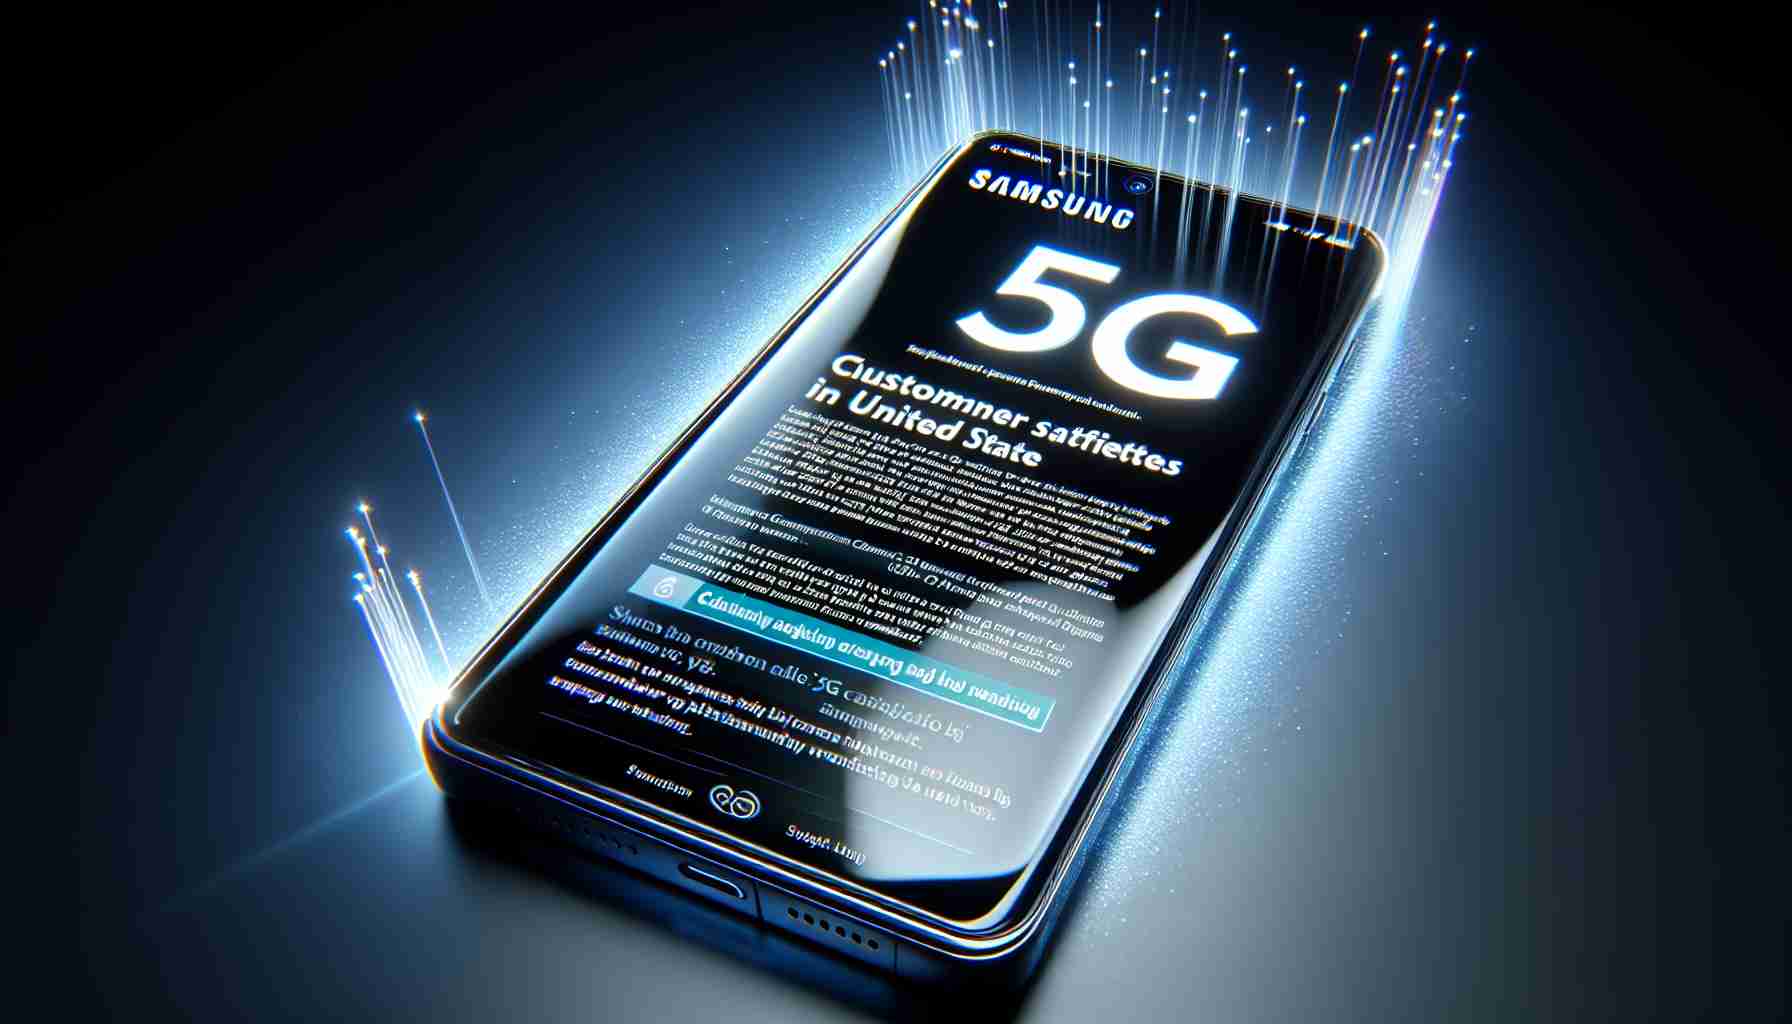 Samsung Galaxy Emerges as Top 5G Smartphone in Customer Satisfaction in the U.S.